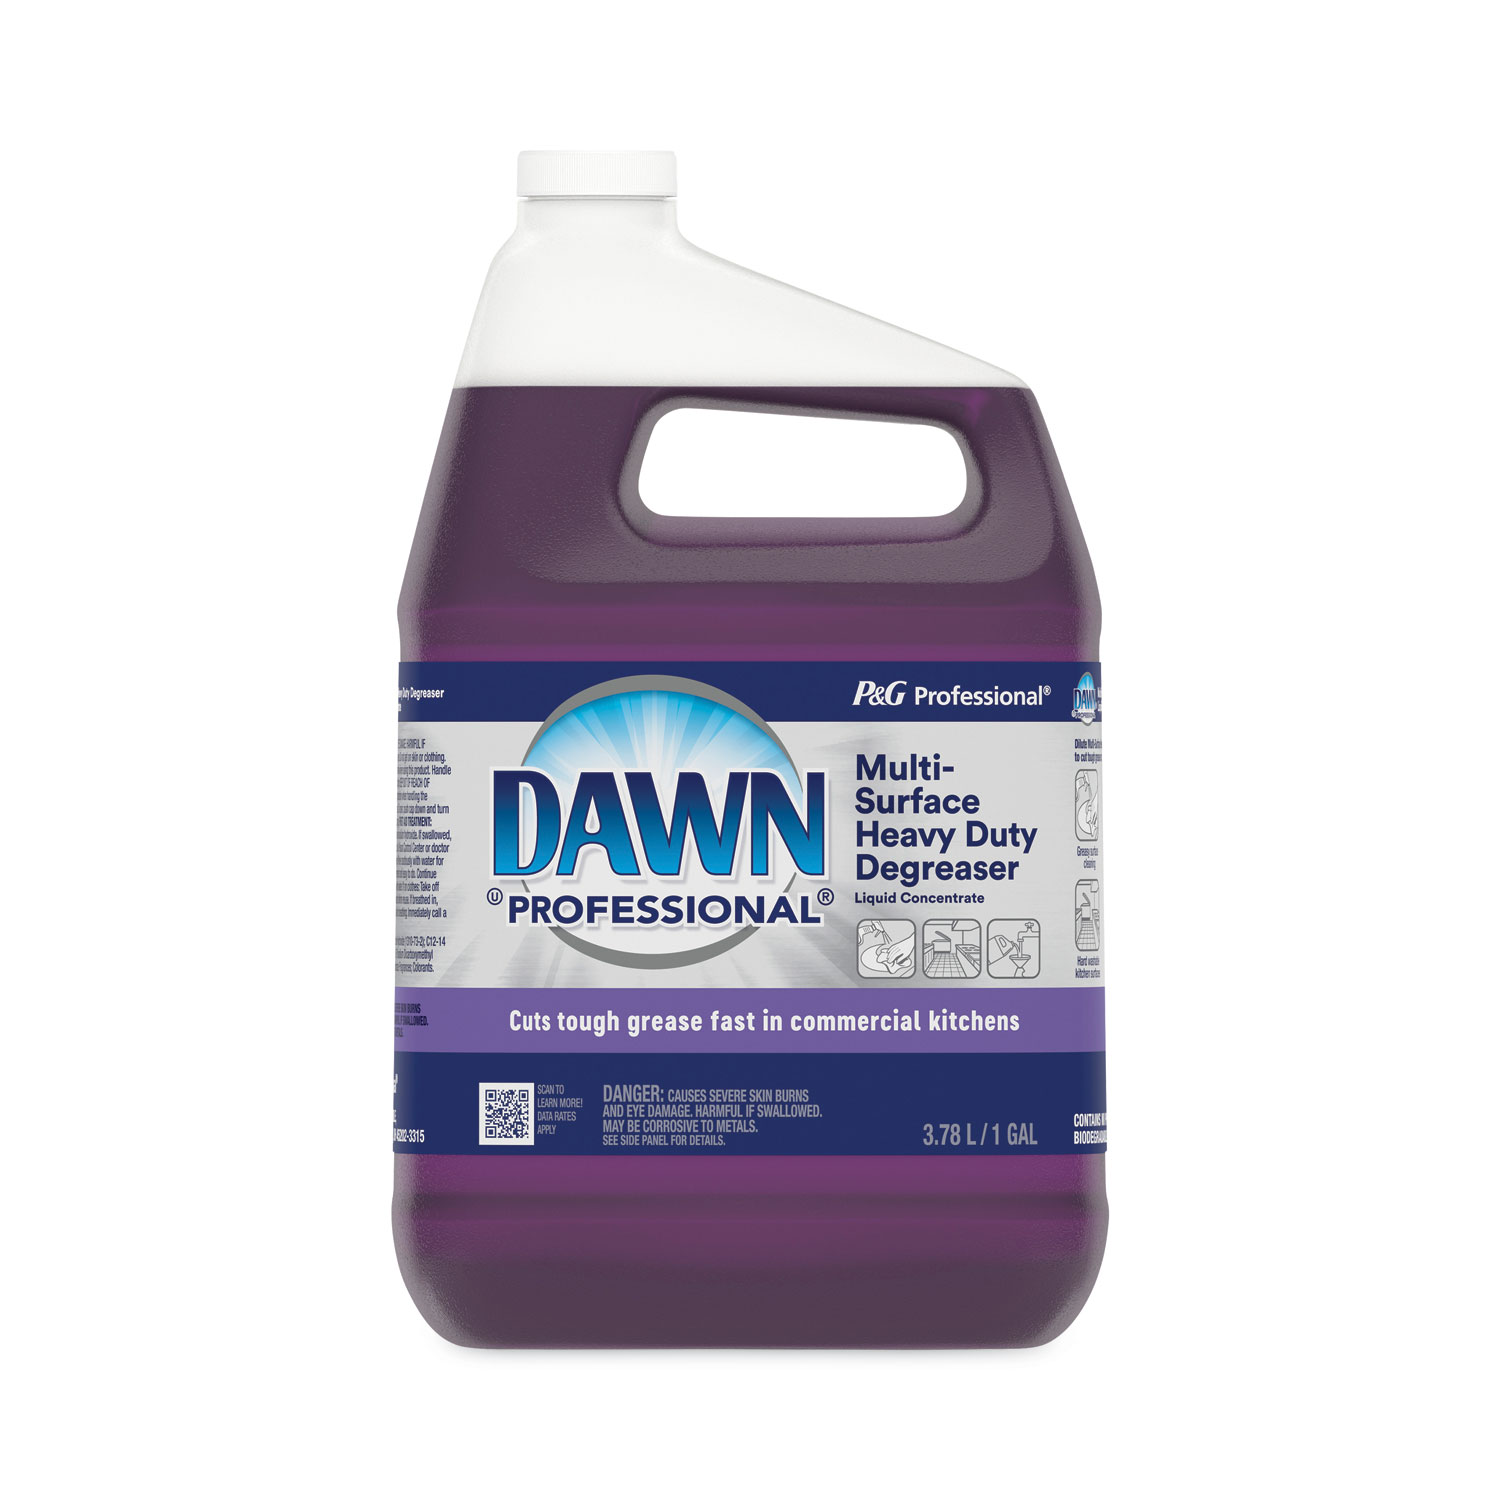 Dawn Multi-Surface Heavy Duty Degreaser Cleaner (2 Gallons)